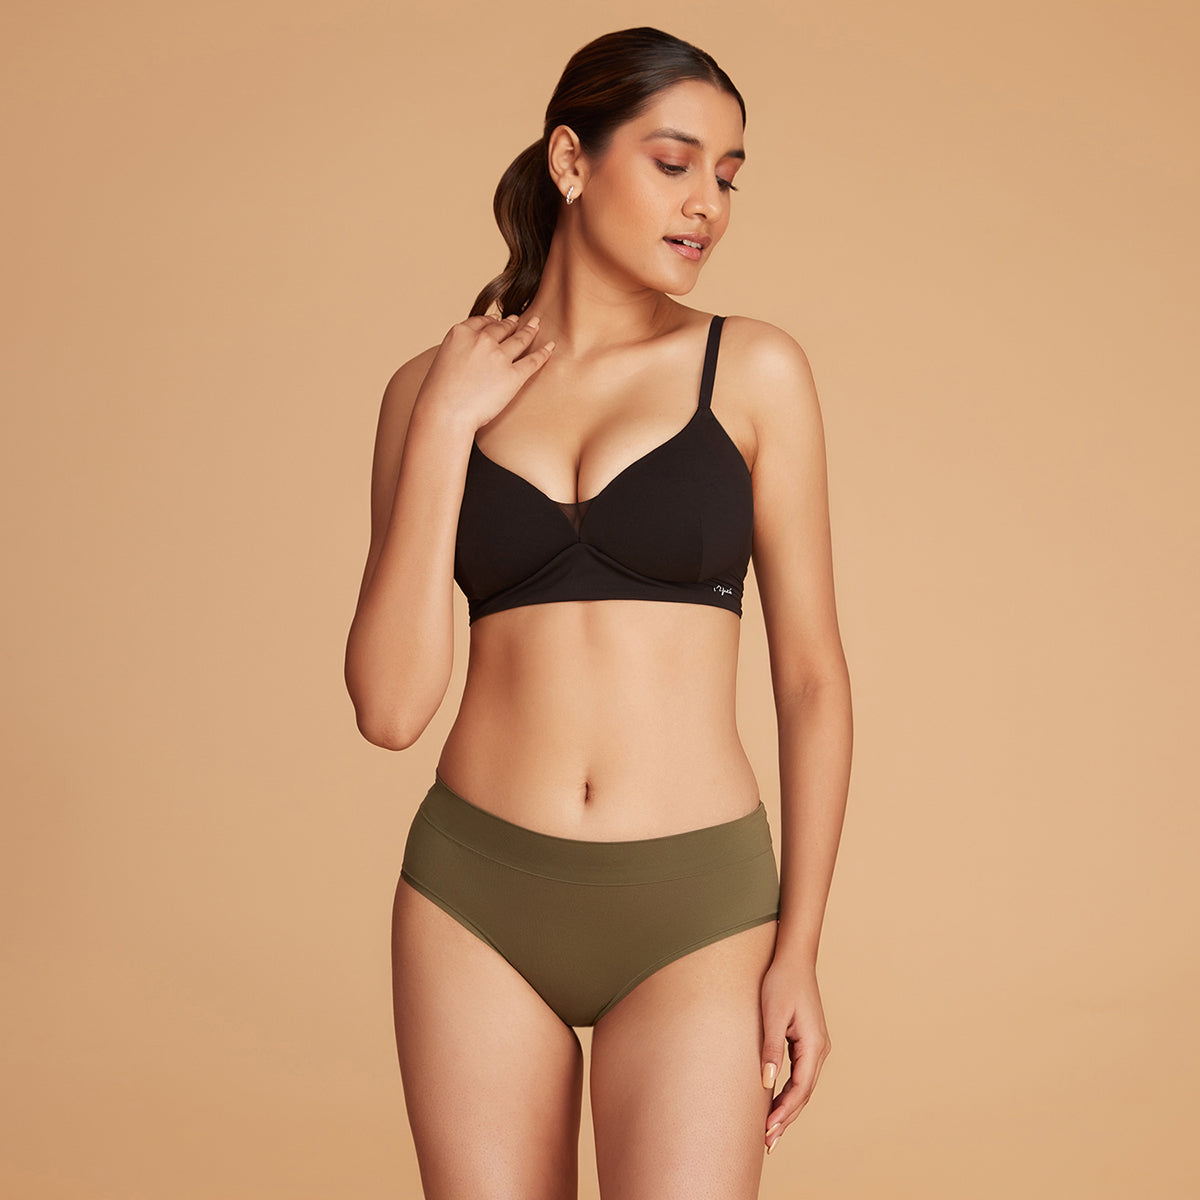 Nykd by Nykaa 4 Way Stretch Hipster Panty - NYP342 - Olive